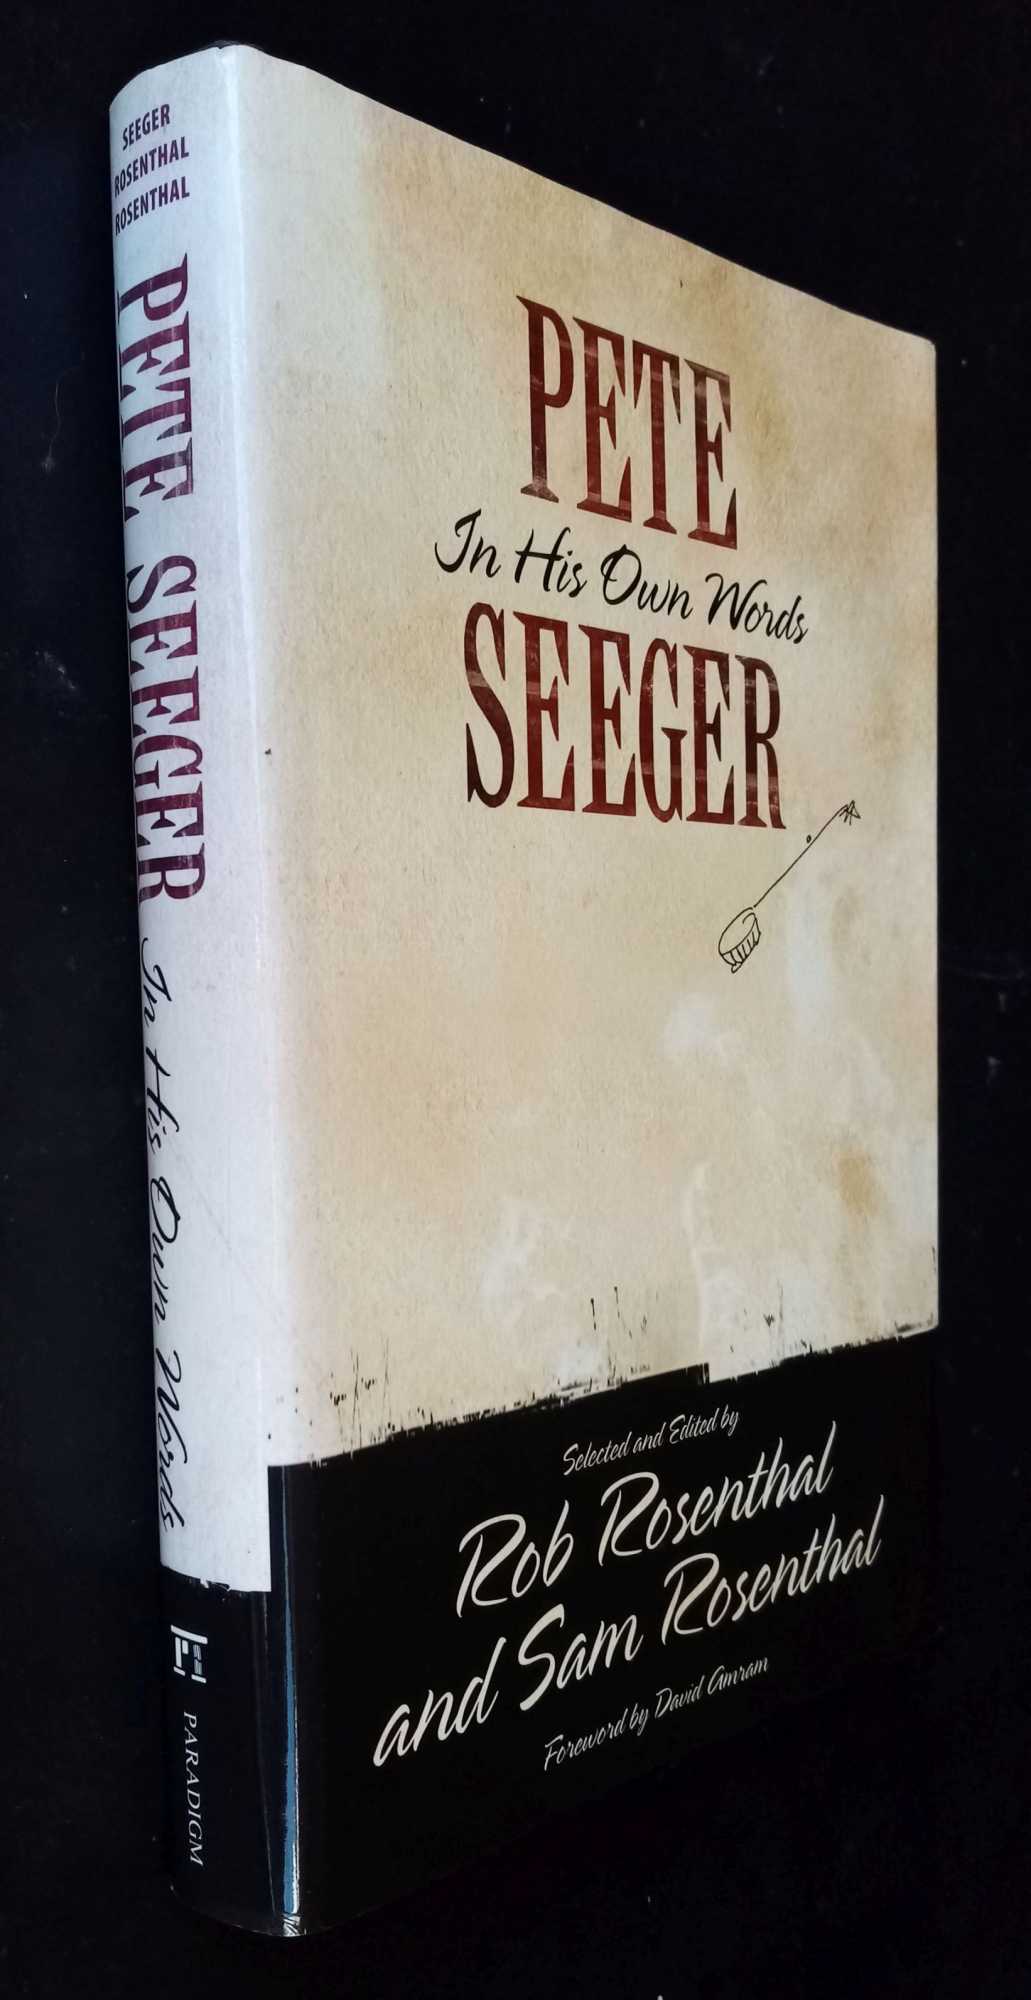 Pete Seeger, ed. and selected by Rob Rosenthal - Pete Seeger in His Own Words